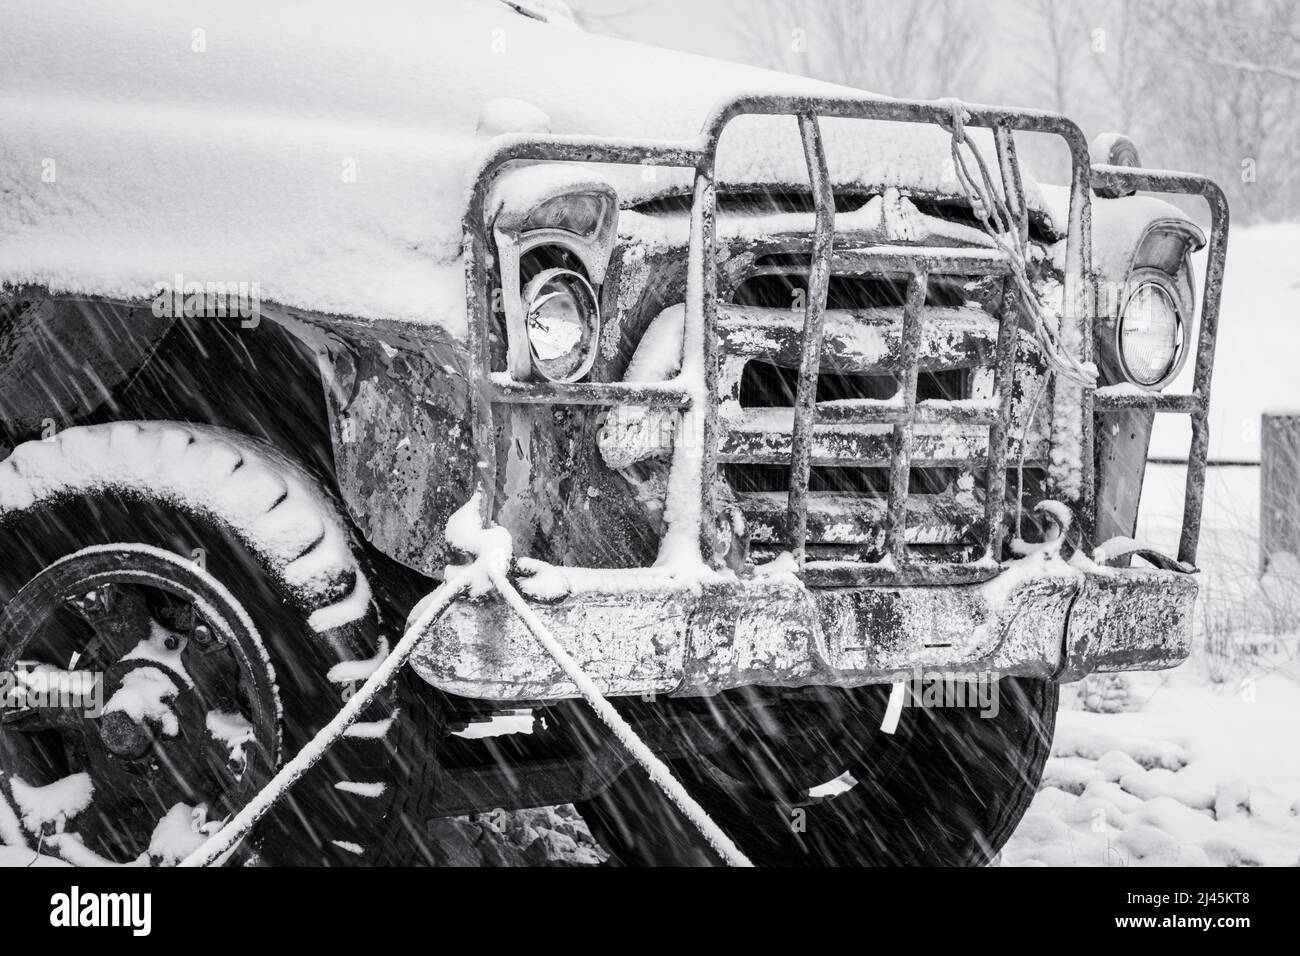 This old International Harvester flatbed truck rides out another winter storm on the lot of a commercial fisherman near Baileys Harbor, Door County WI Stock Photo